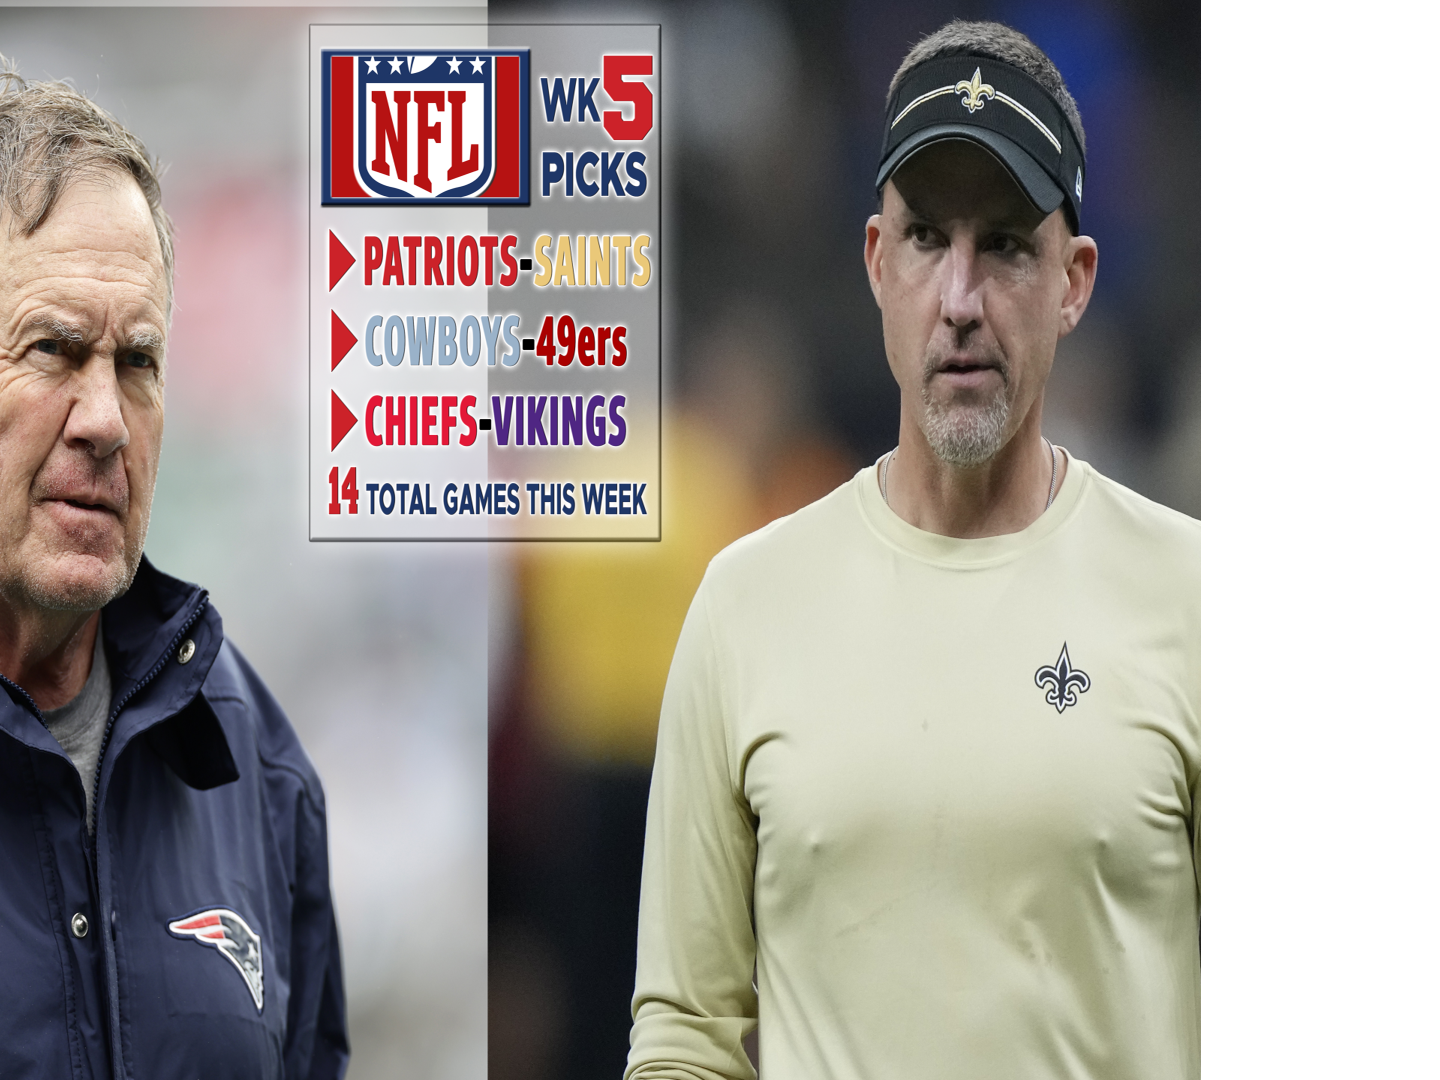 Coach's Picks: Best Bets Against The Spread, NFL Week 2